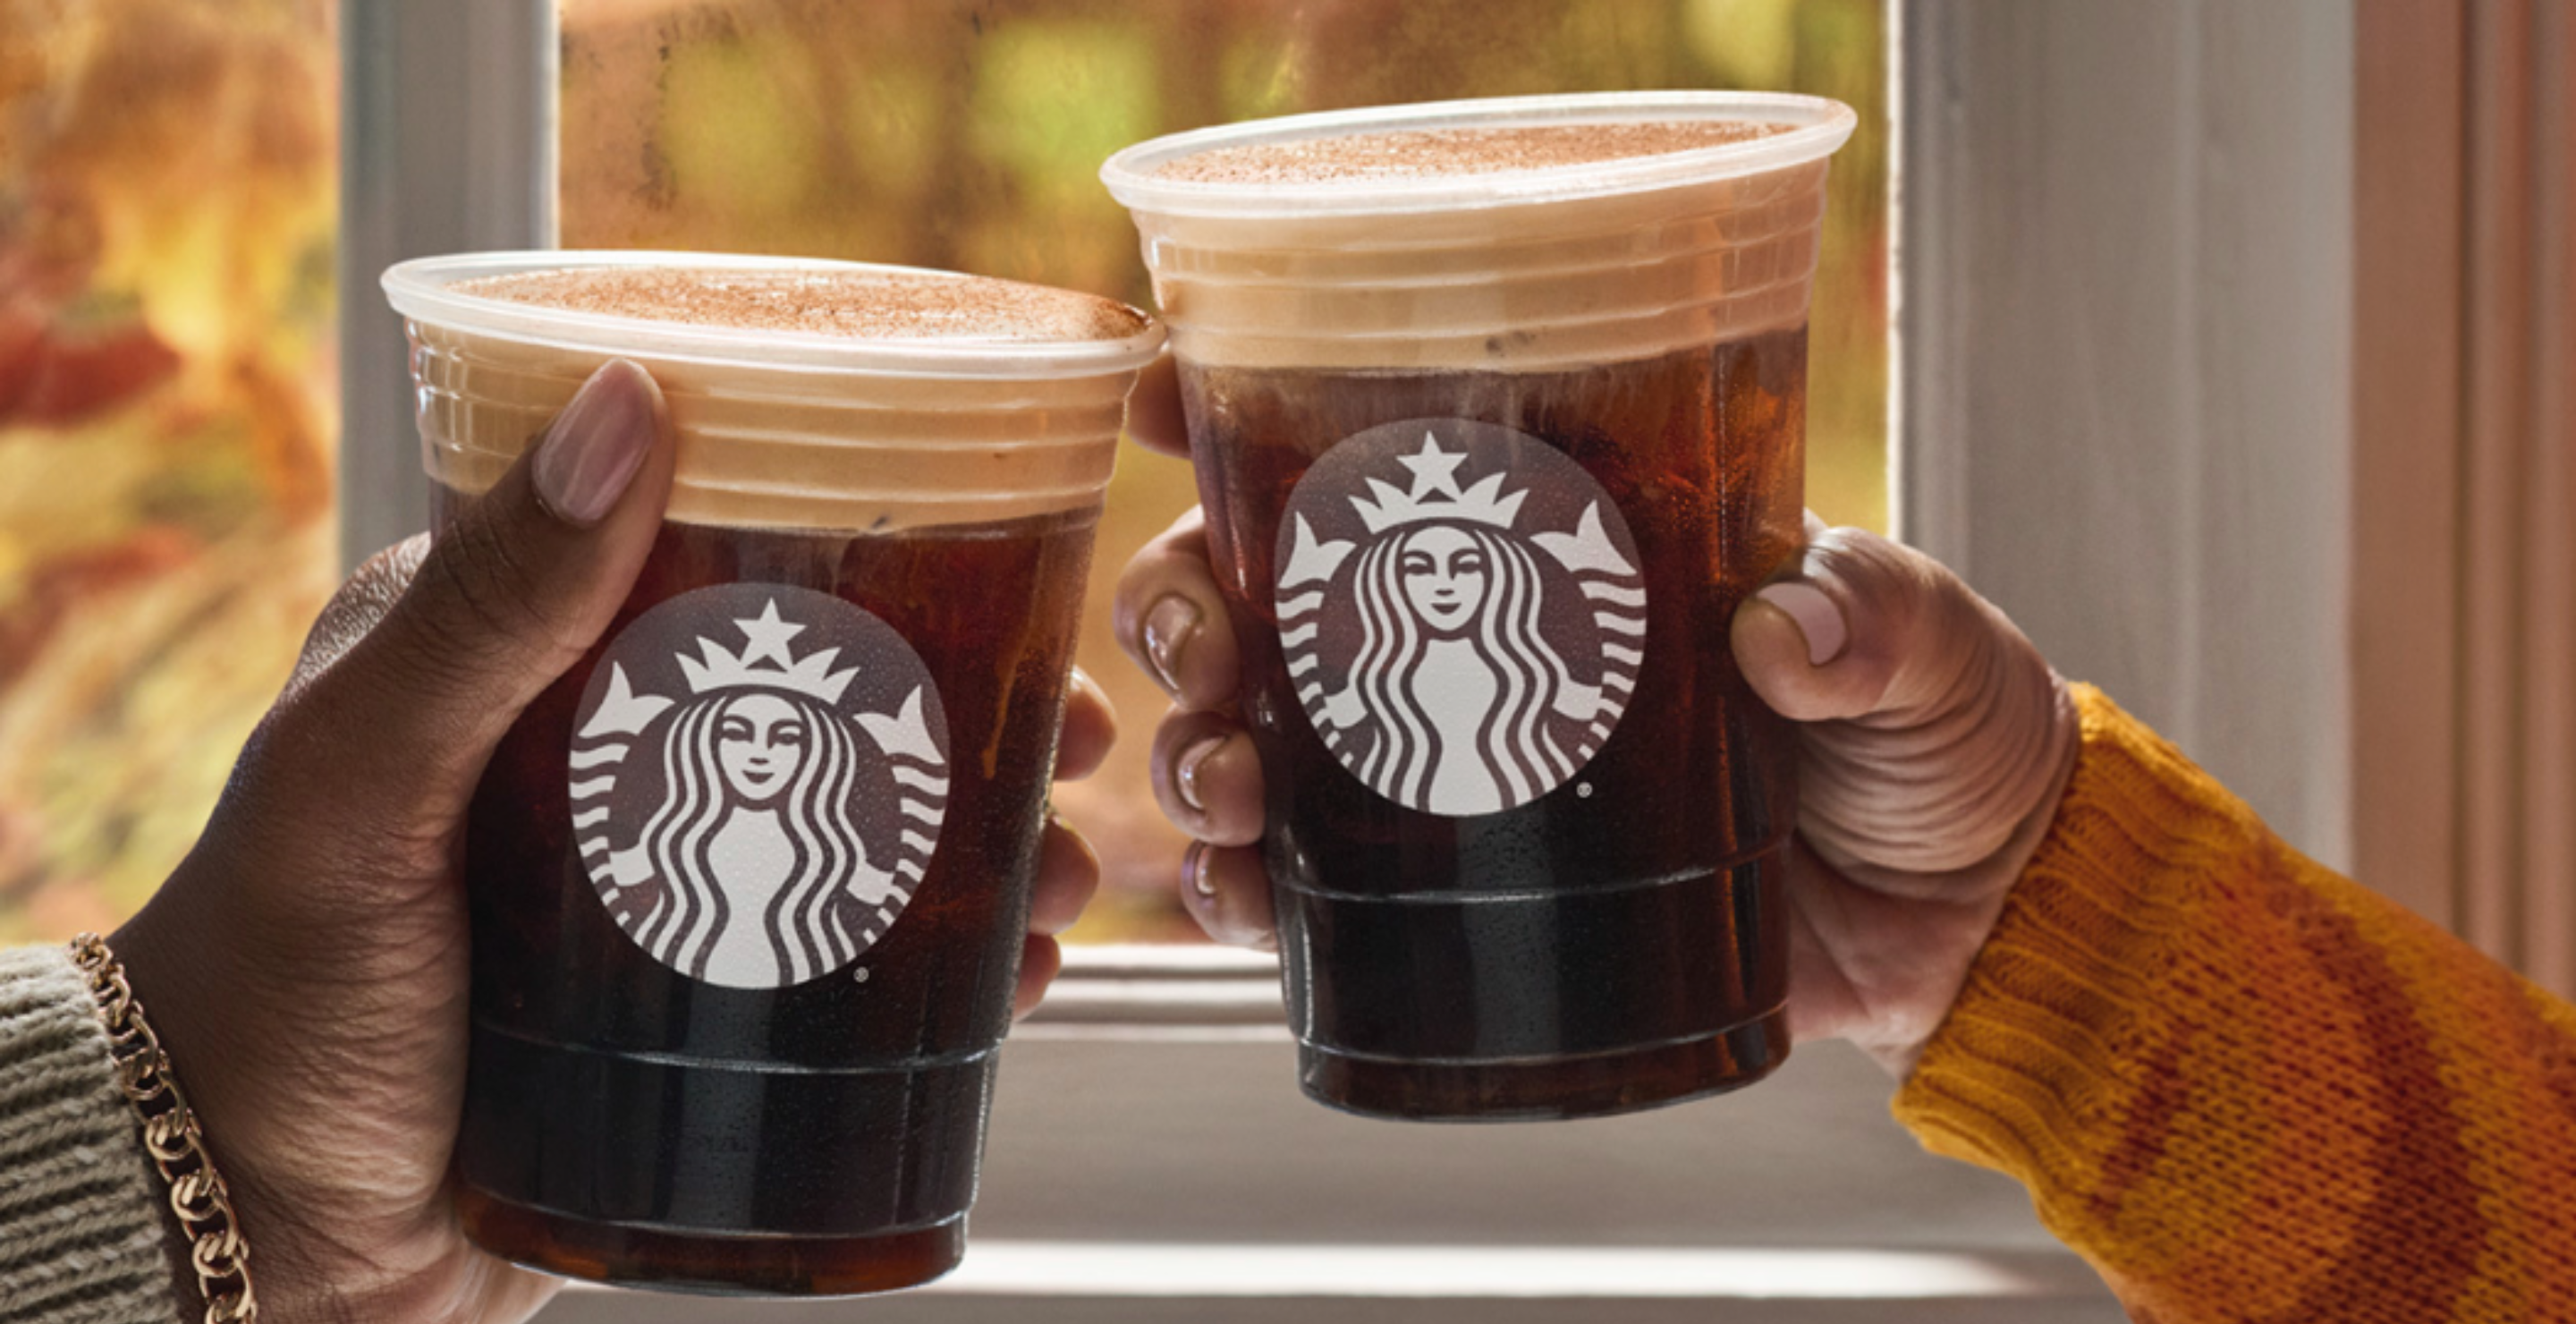 Starbucks Just Released Their Fall Drinks—Here's What's